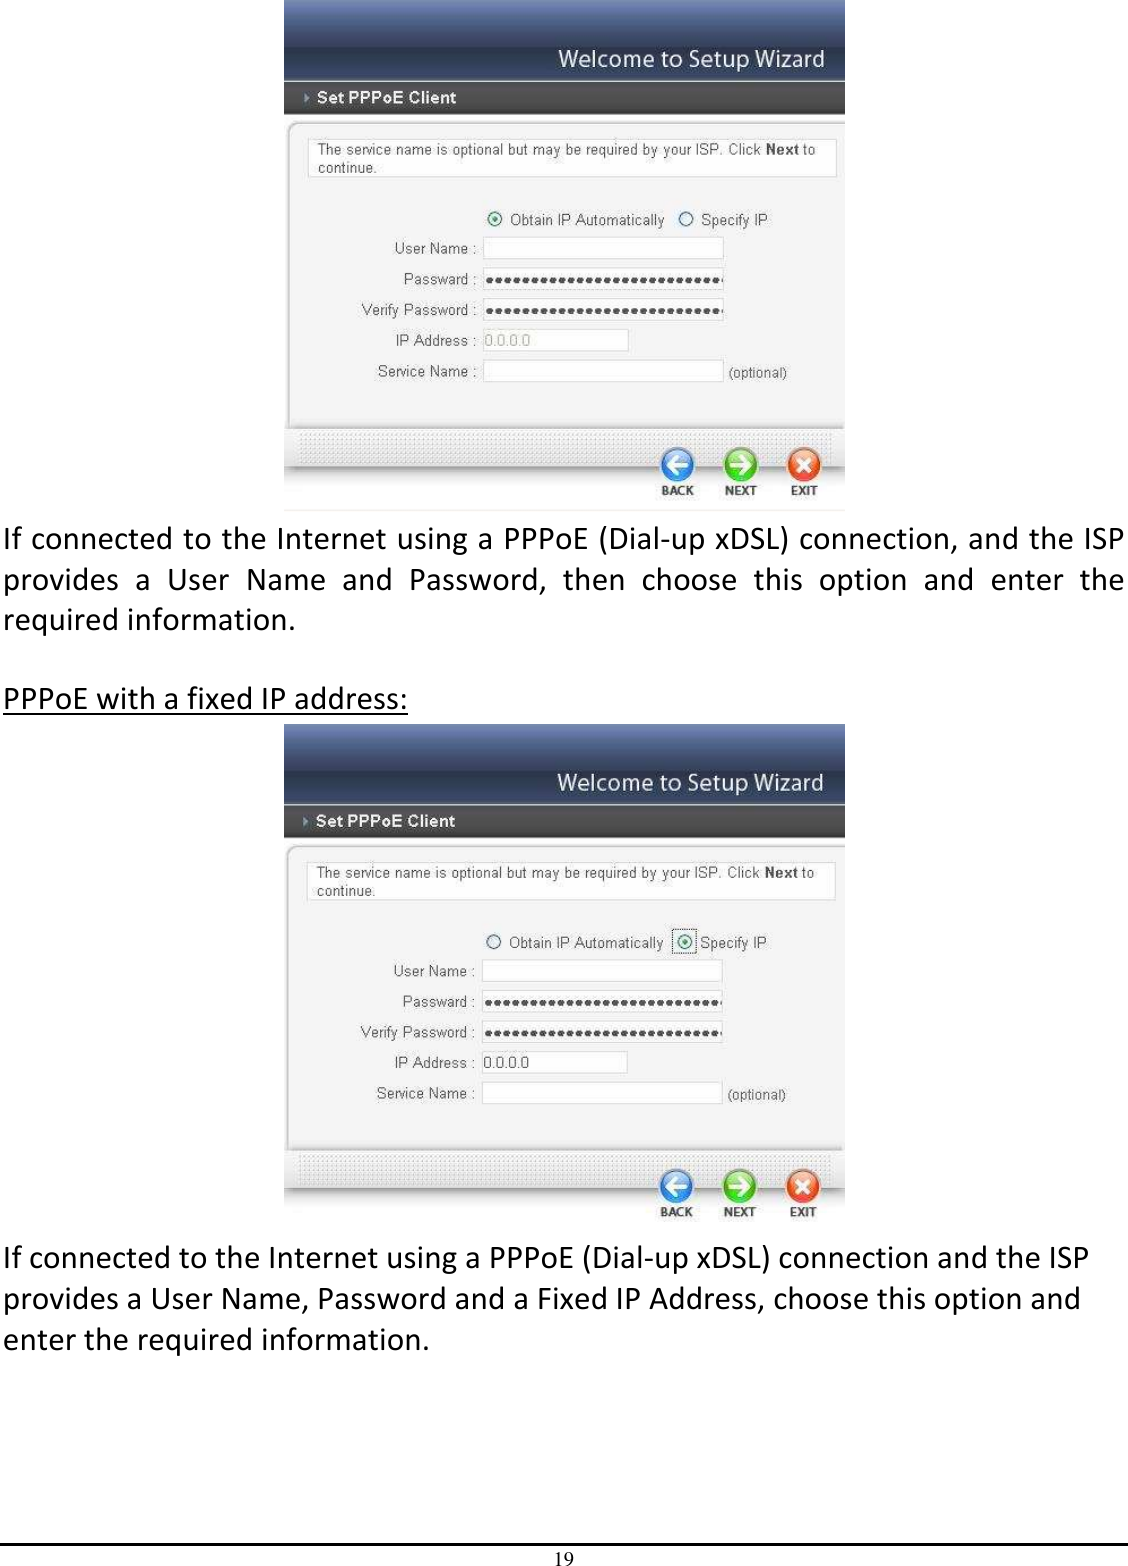 19  If connected to the Internet using a PPPoE (Dial-up xDSL) connection, and the ISP provides  a  User  Name  and  Password,  then  choose  this  option  and  enter  the required information.  PPPoE with a fixed IP address:  If connected to the Internet using a PPPoE (Dial-up xDSL) connection and the ISP provides a User Name, Password and a Fixed IP Address, choose this option and enter the required information.  